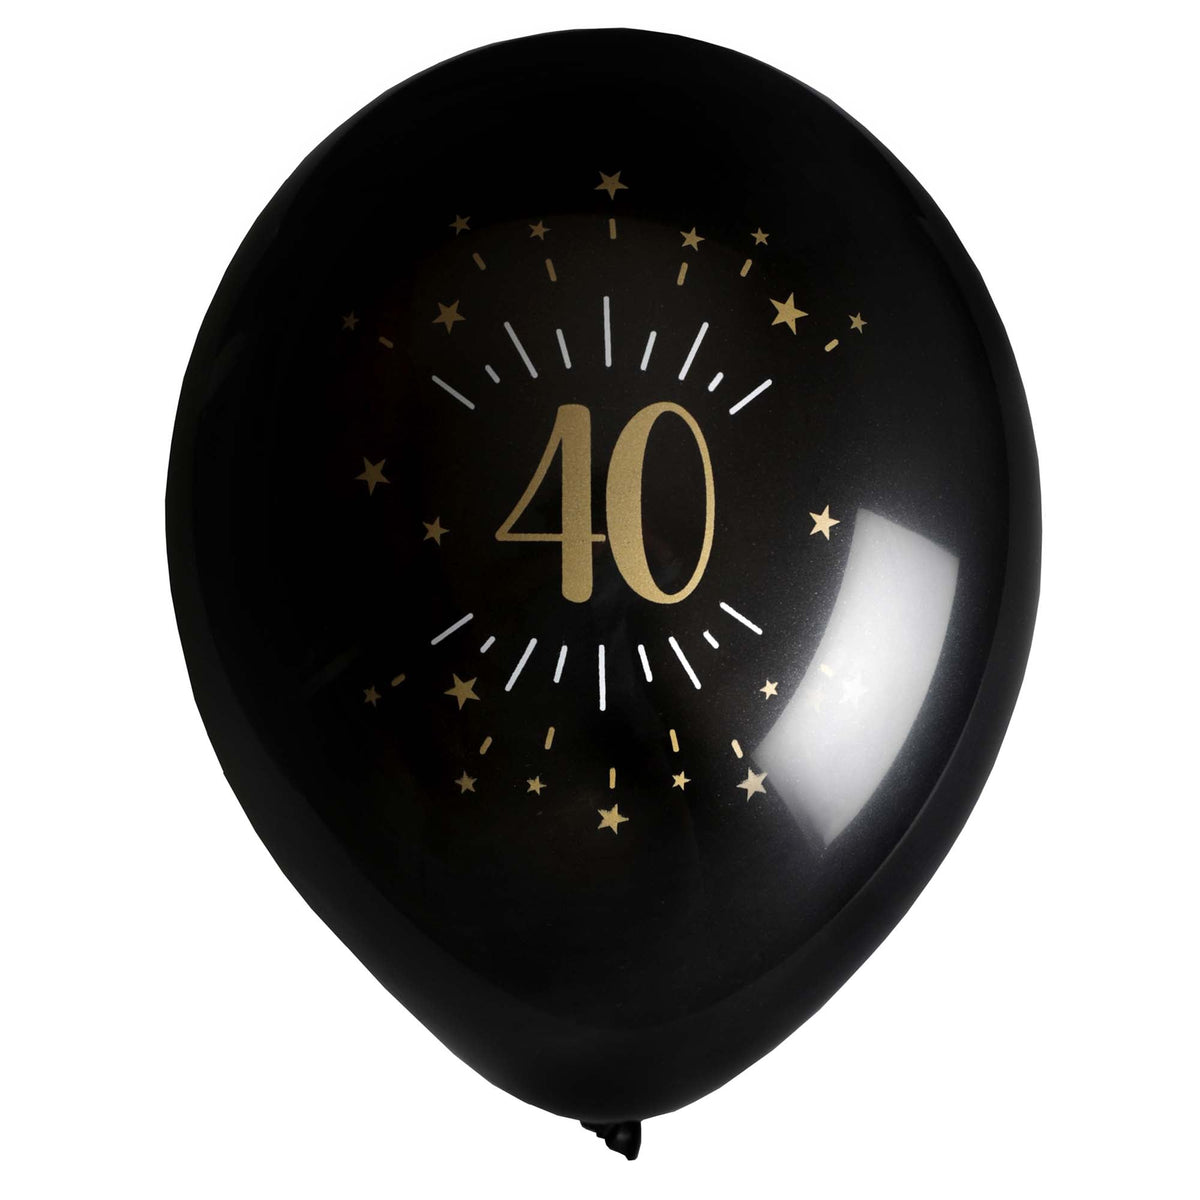 SANTEX Age Specific Birthday Black and Gold 40th Birthday Latex Balloons, 12 Inches, 6 Count 3660380070412